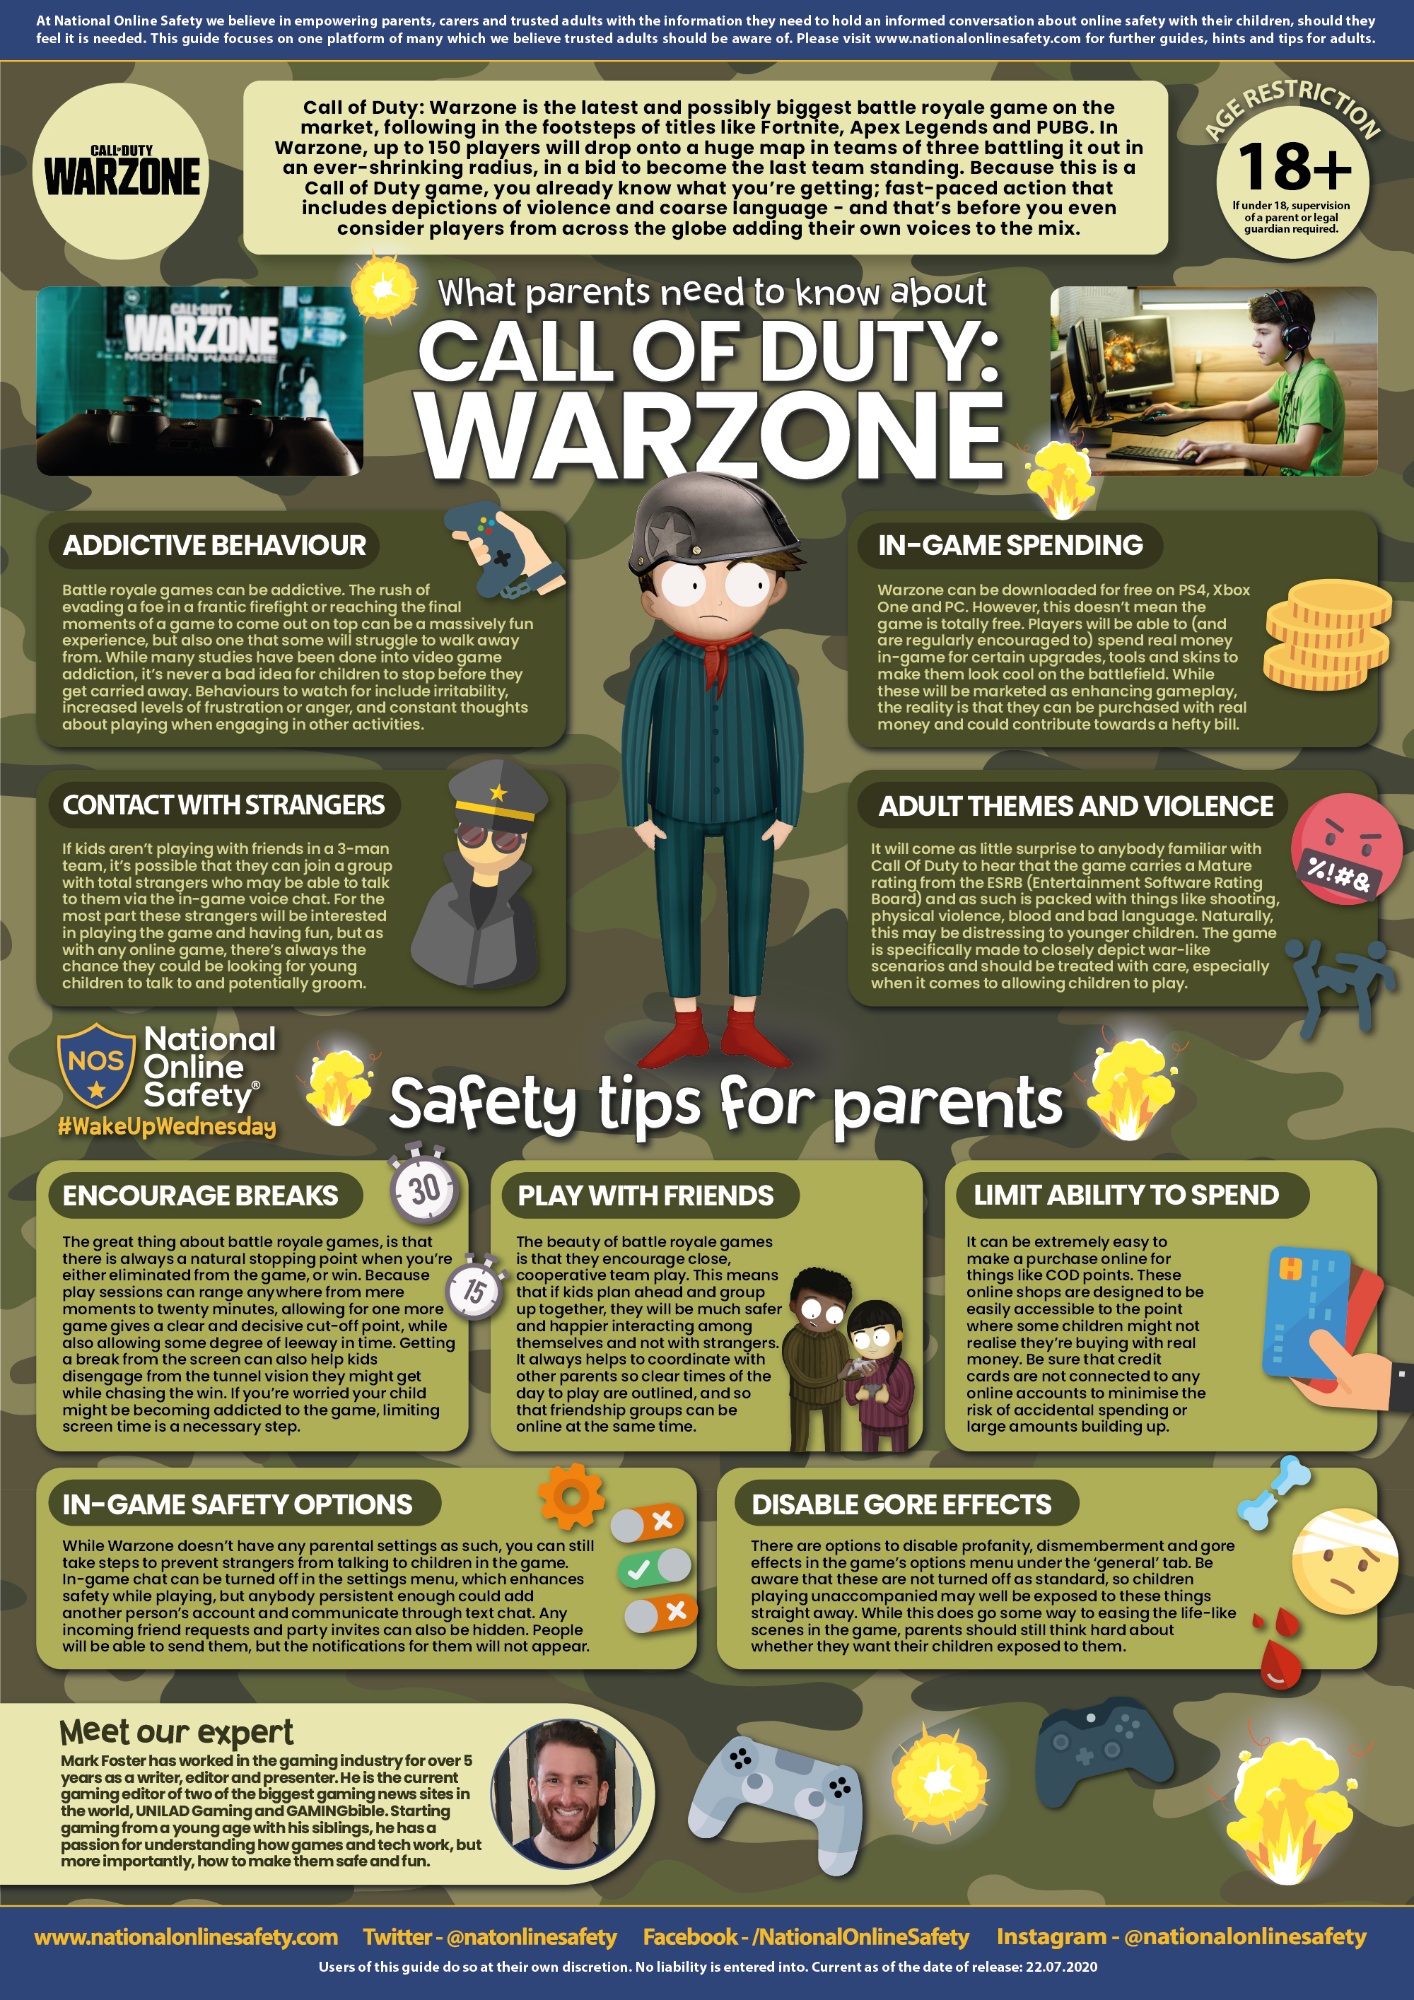 Family Guide to Call of Duty Warzone